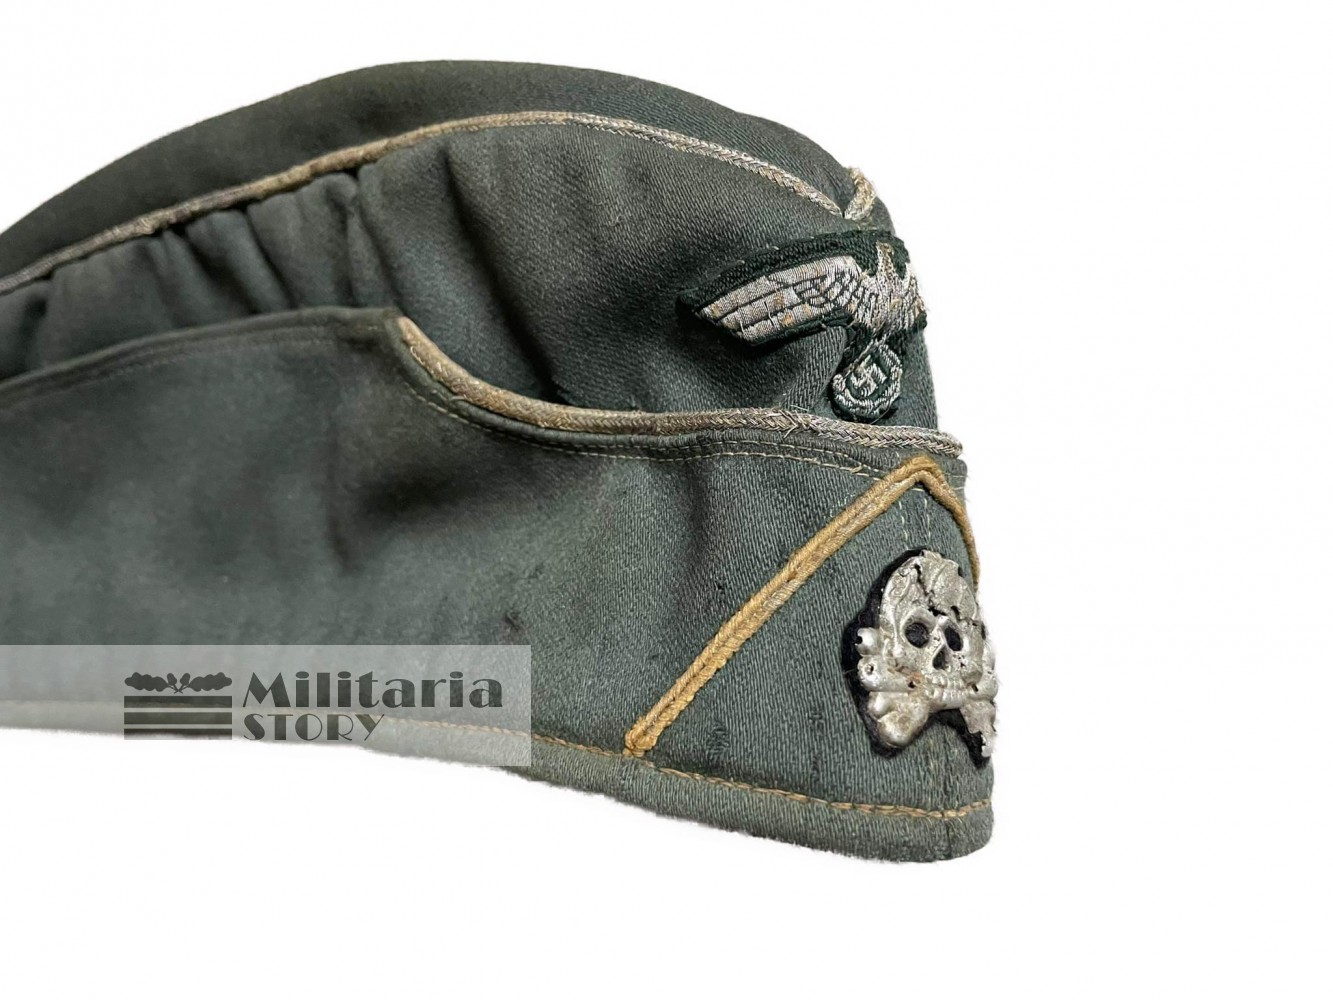 Untouched Waffen SS Officer side cap - Untouched Waffen SS Officer side cap: Third Reich Headgear